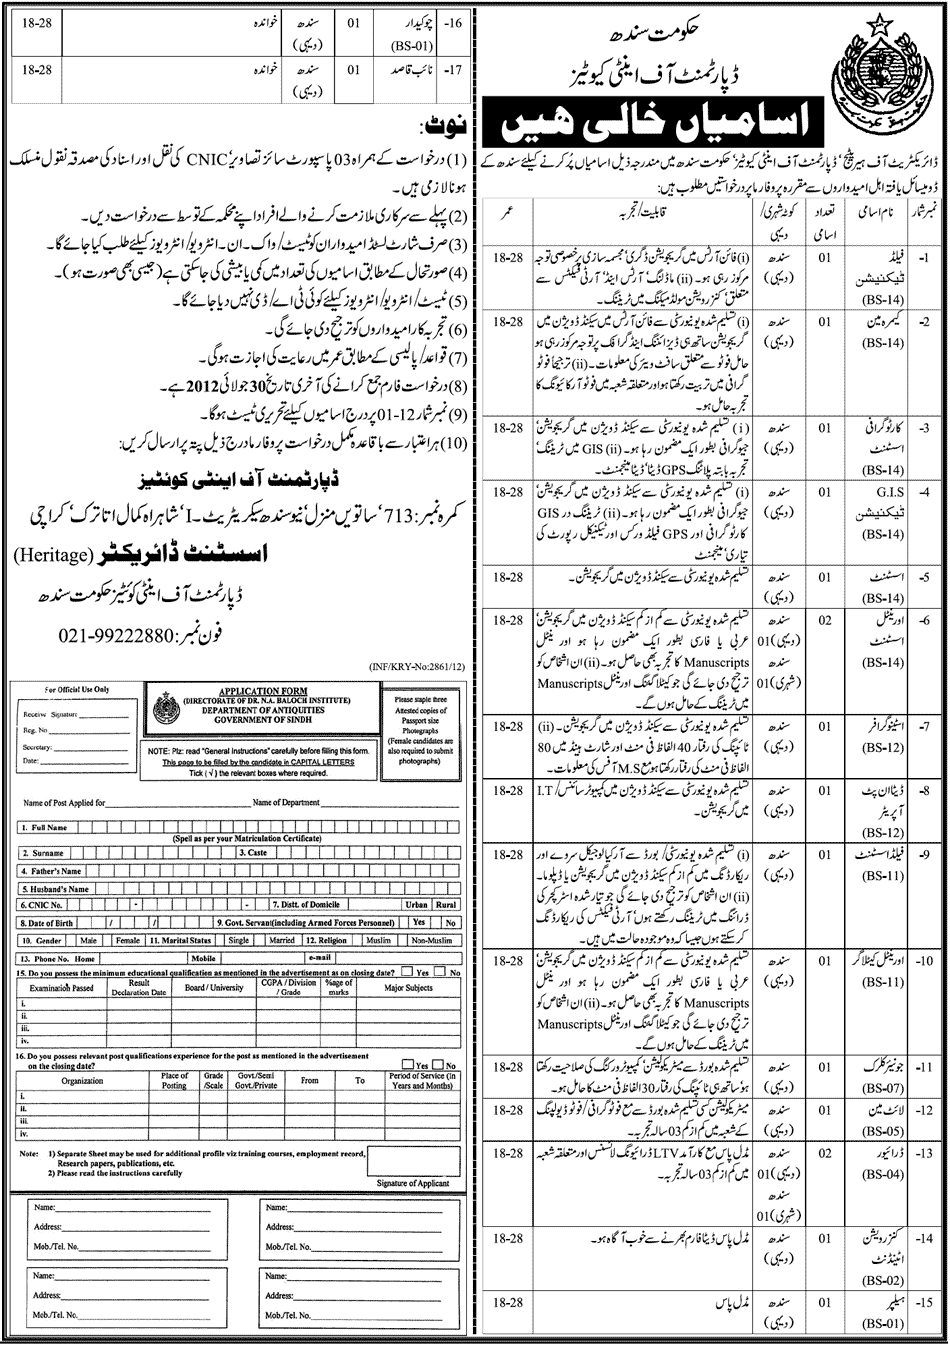 Technical Staff and Admin Staff Required at Directorate of Heritage (Department of Antiquities) Government of Sindh